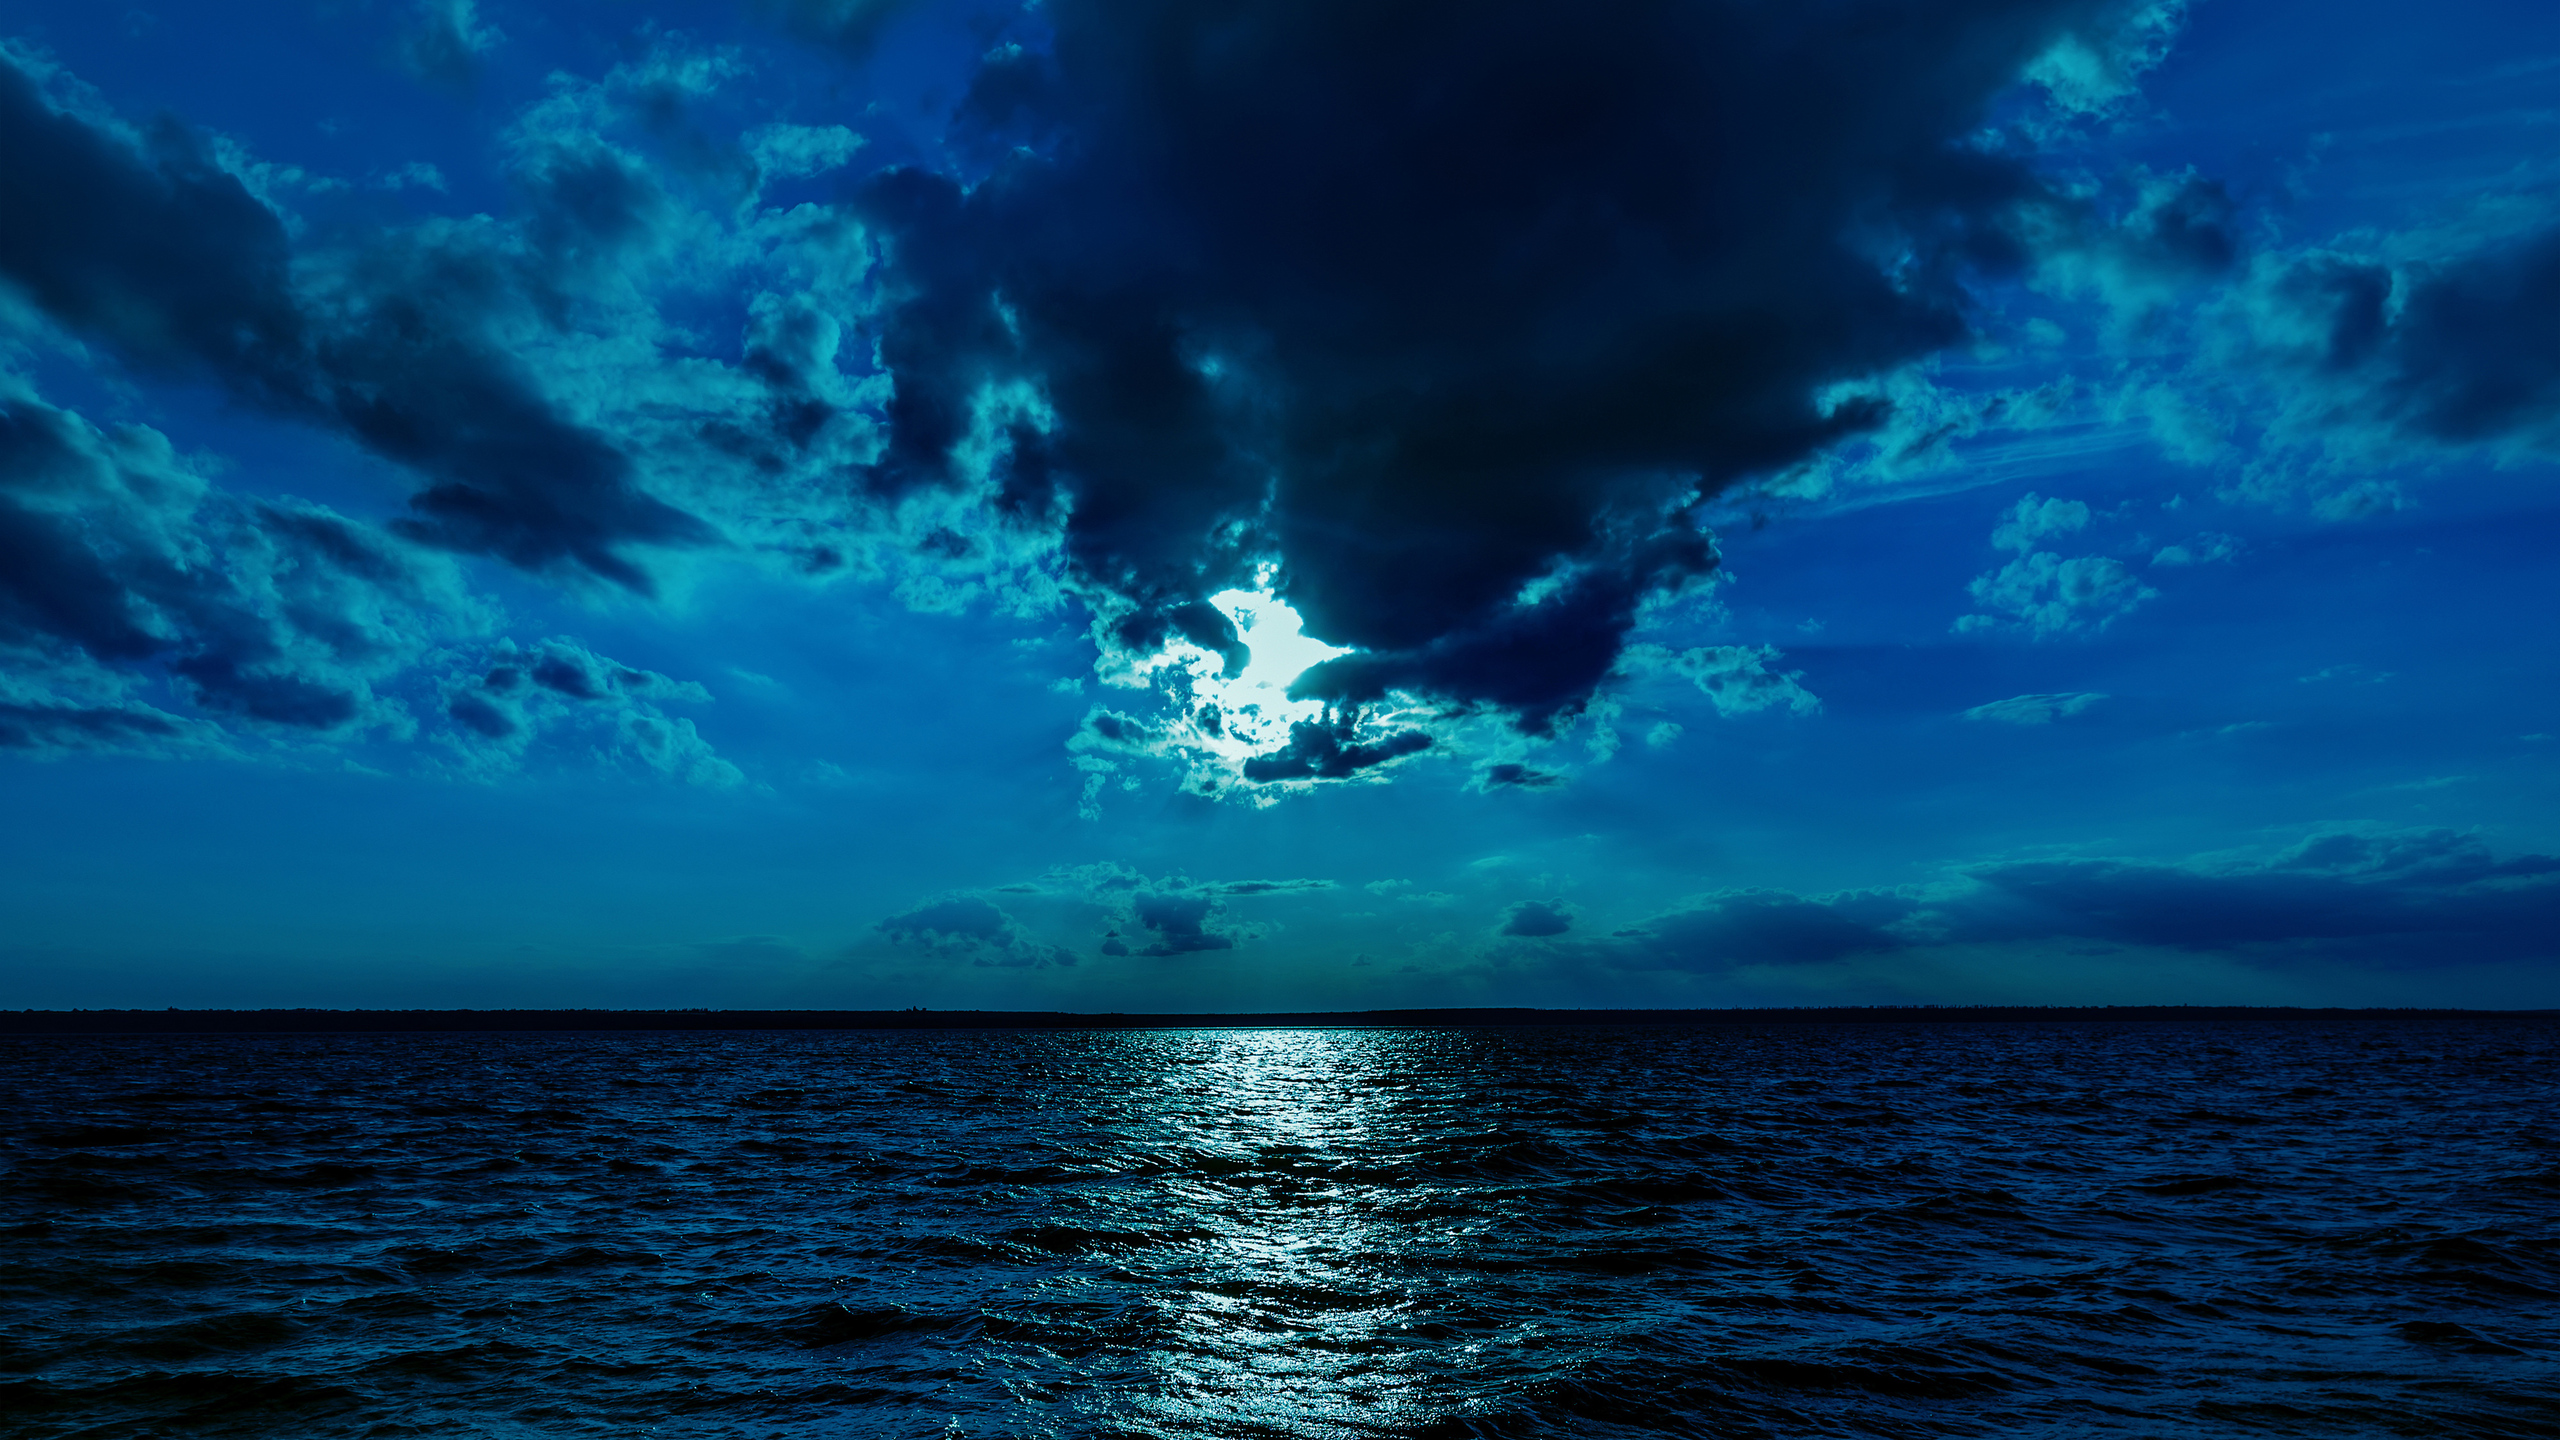 Night Moon Sea Sky Blue 4k 1440P Resolution HD 4k Wallpaper, Image, Background, Photo and Picture